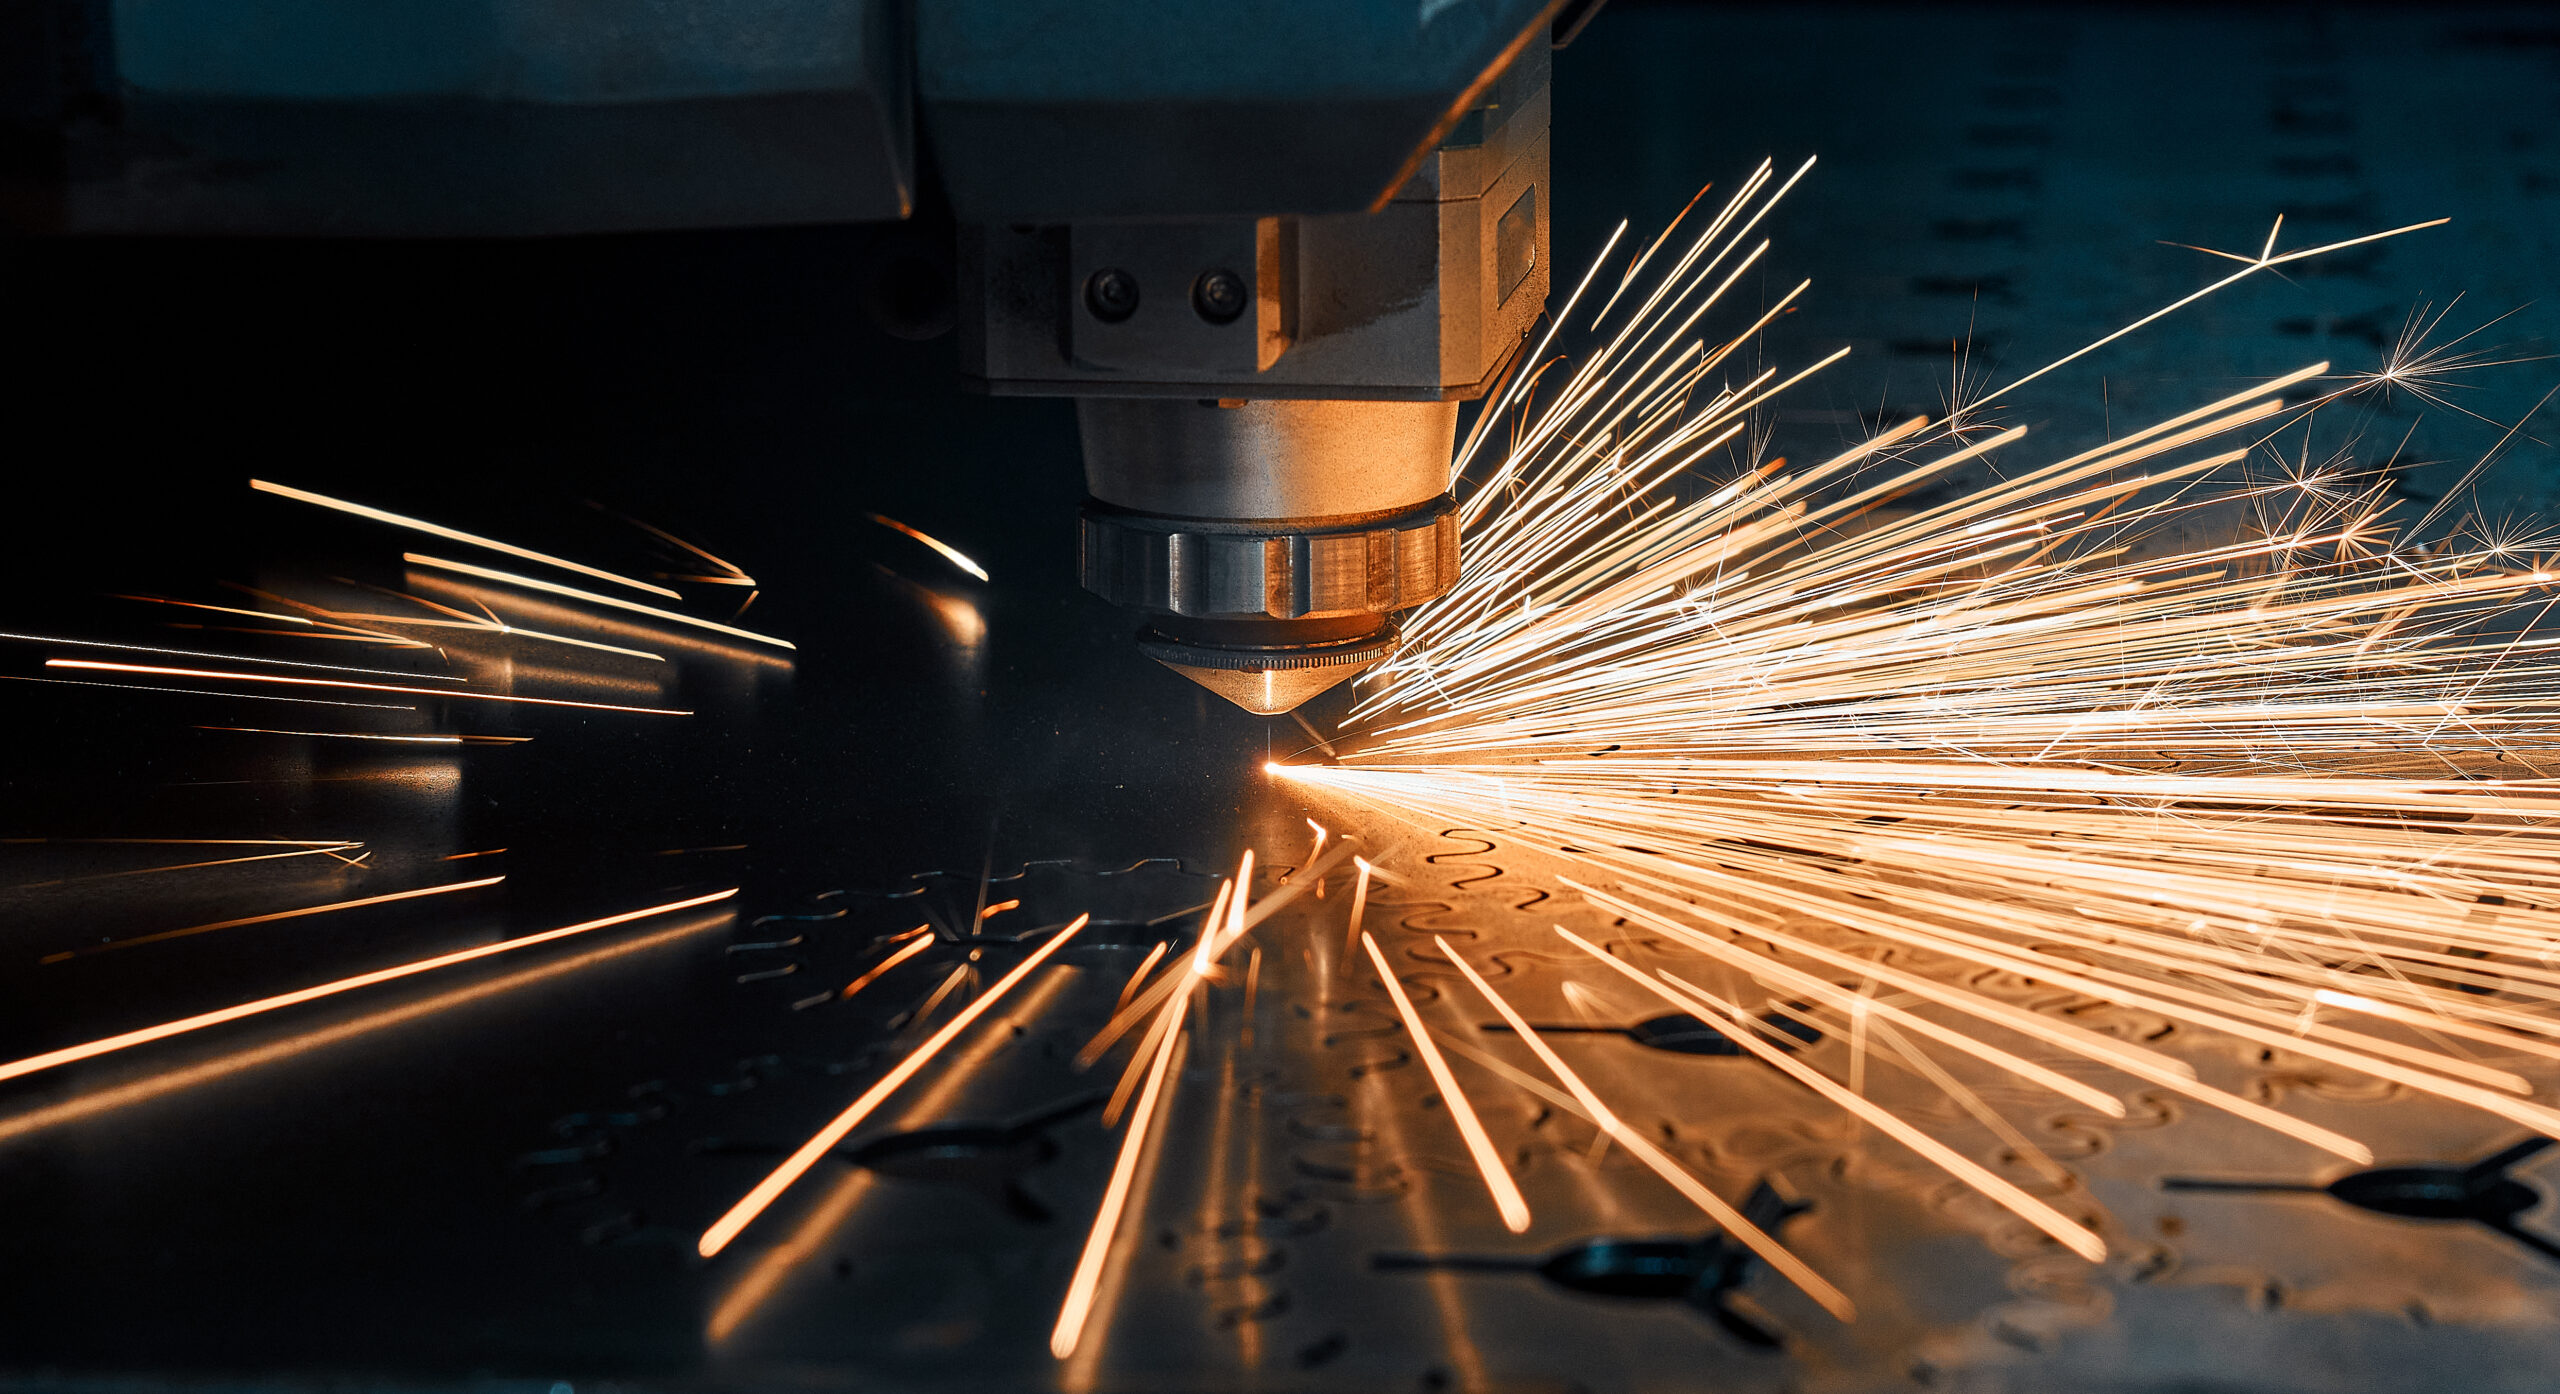 laser cutting company - an image of a sparking laser cutting metal in a metal fabrication company